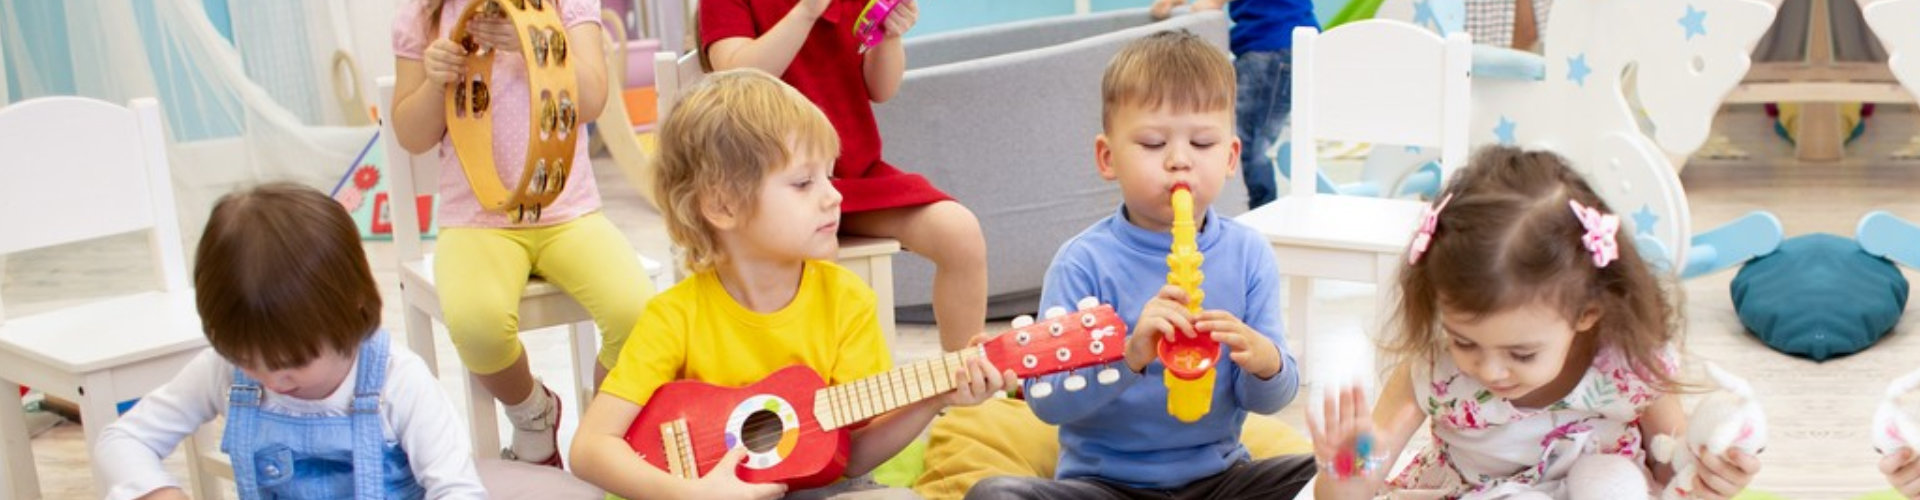 kids playing a musical instruments